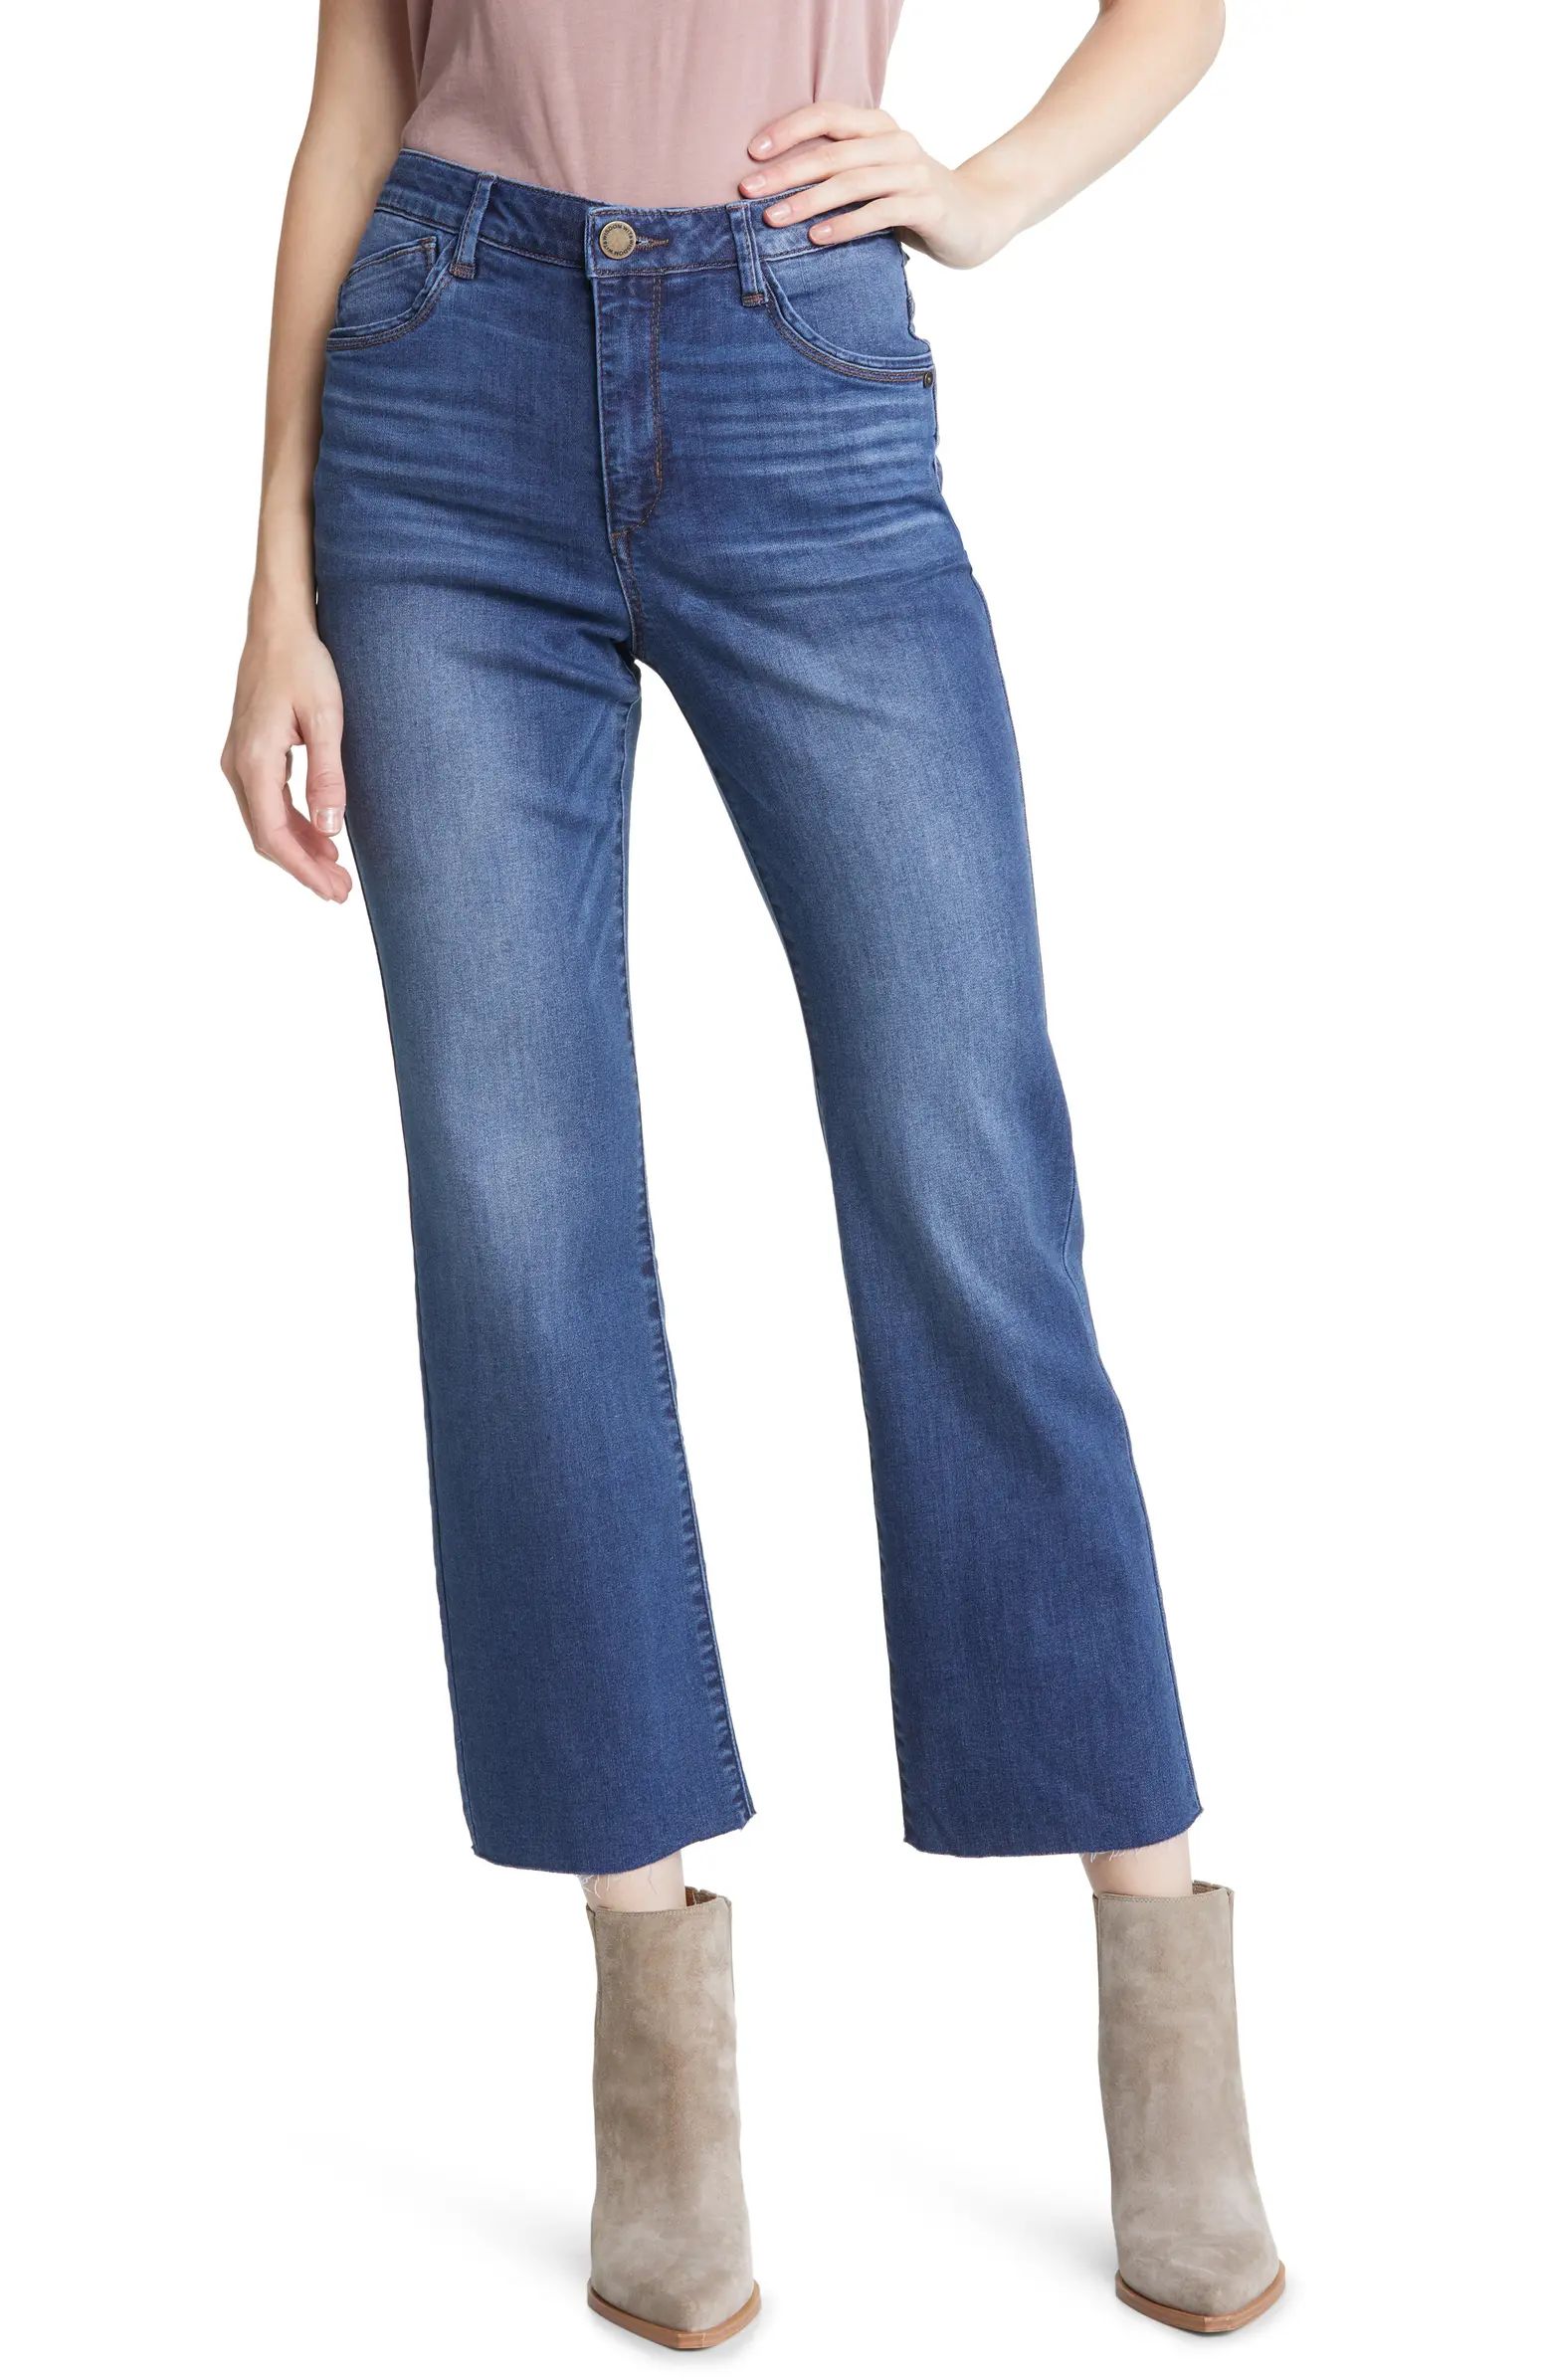 'Ab'Solution Skyrise Barely Bootcut Jeans | Nordstrom